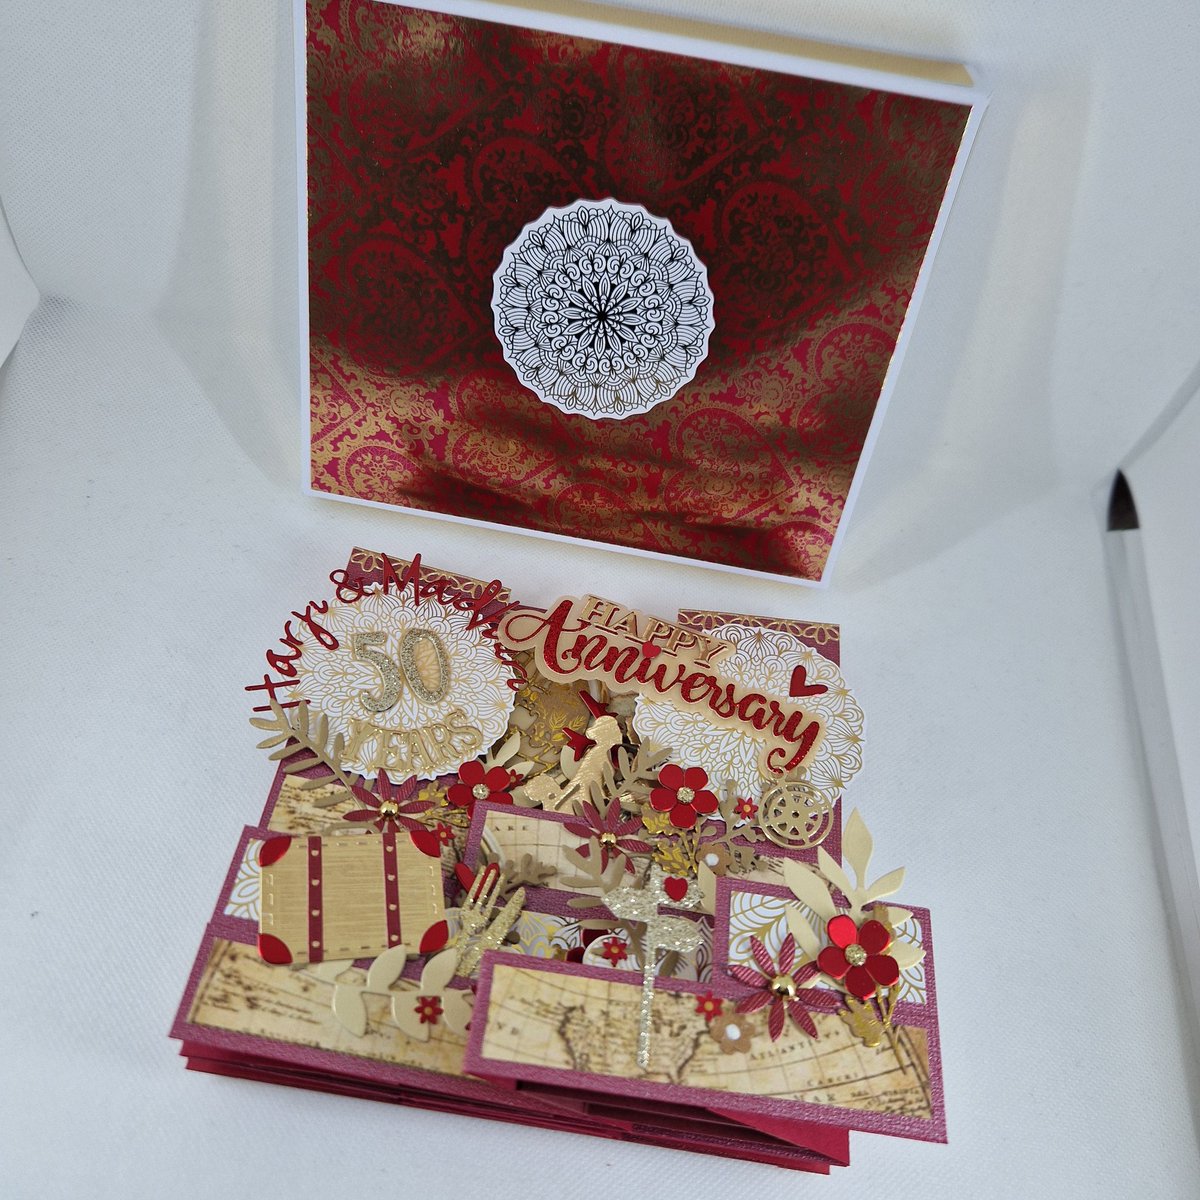 Personalised Indian wedding style 50th Anniversary card. Double display staggered Z-fold pop-up box card.

#handmadecards #handmade #personalised #popupcard #boxcard #50thweddinganniversary #indianwedding #travel #flowers #food #love #couple